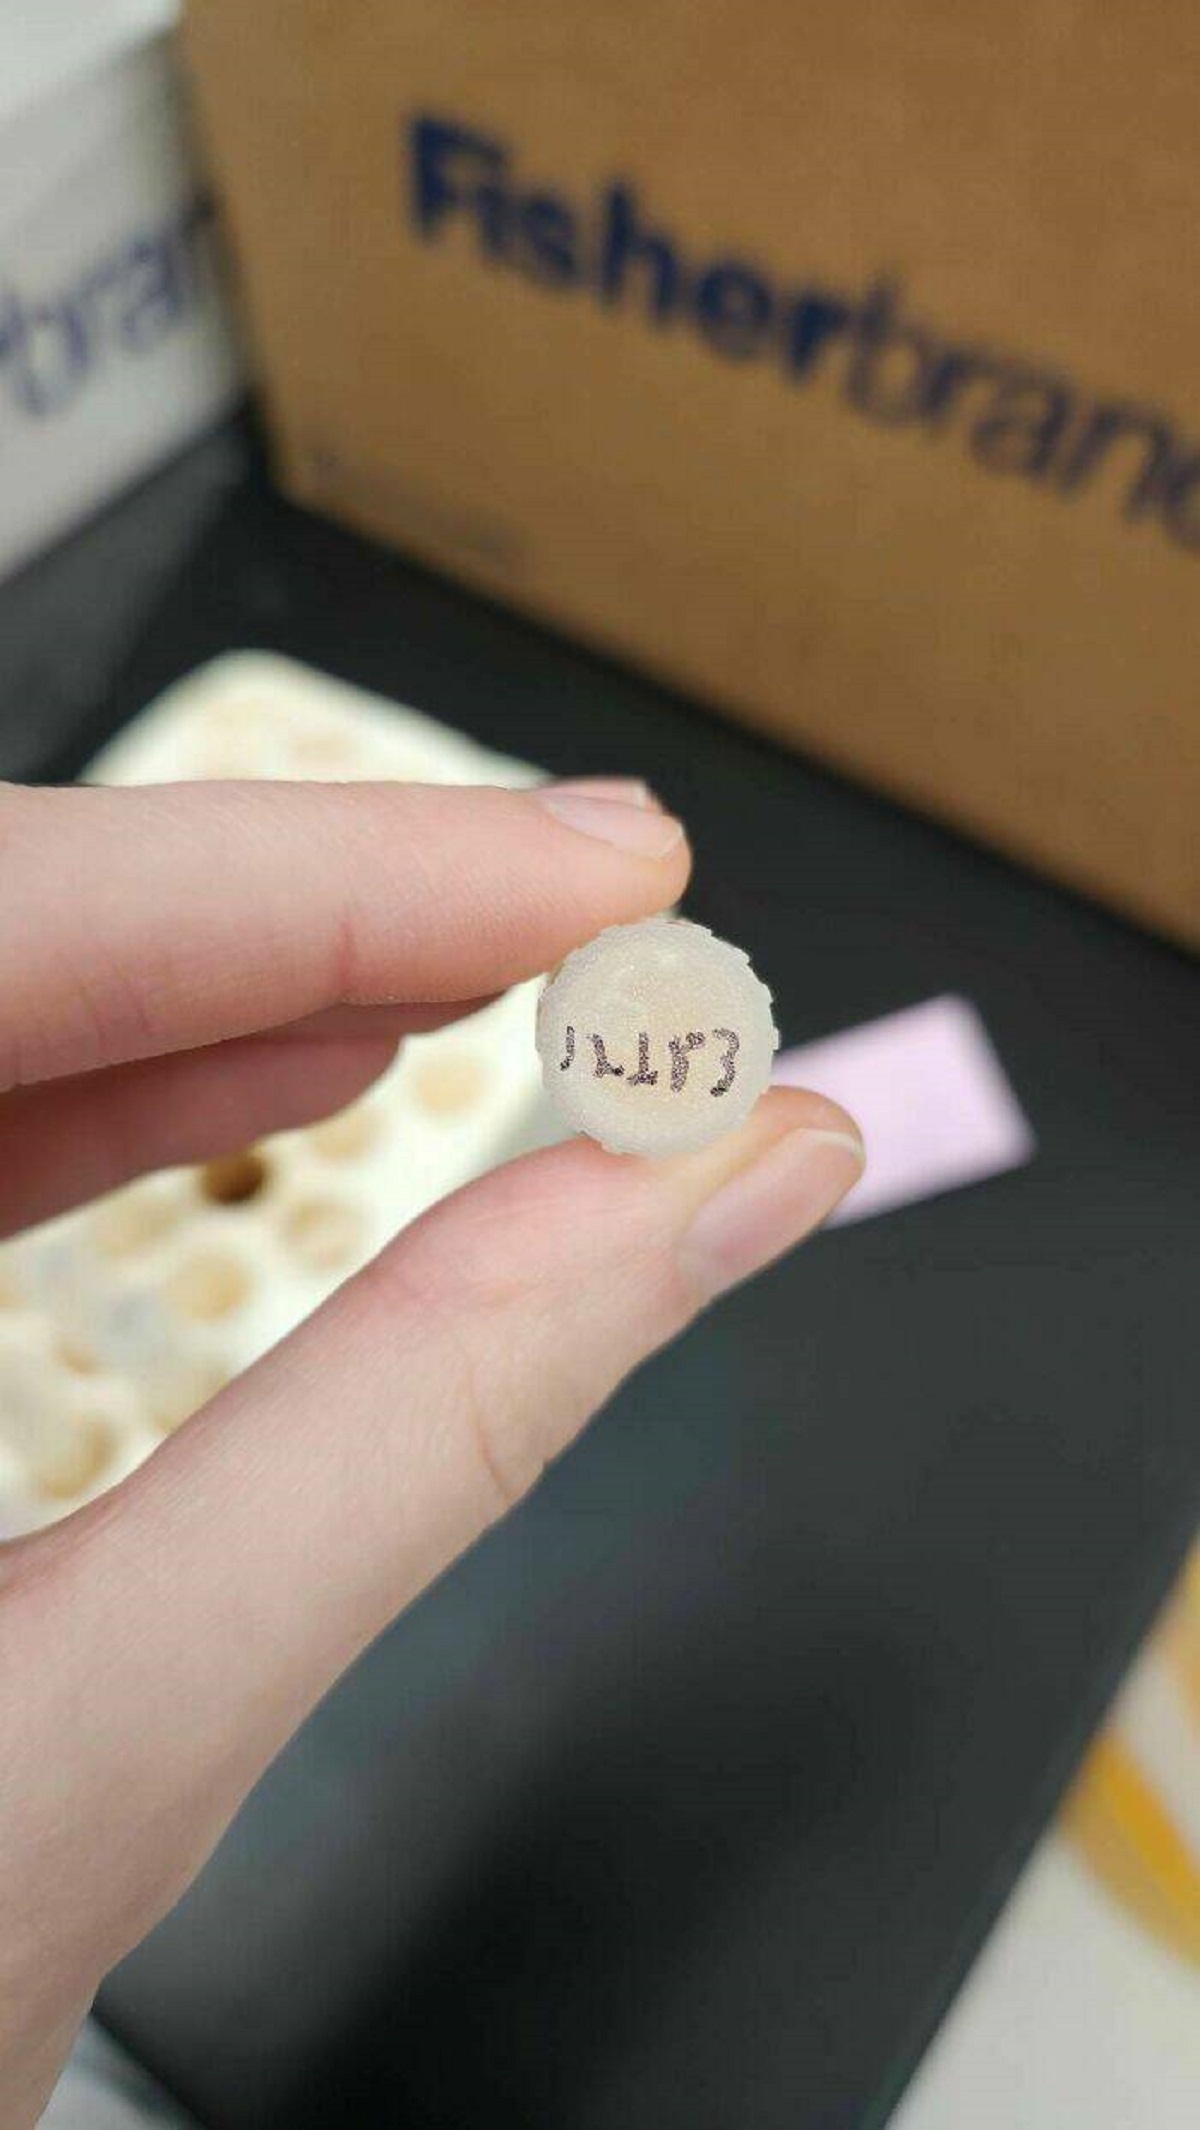 "The Way My Coworker Labels Vials And Expects People To Be Able To Read It"